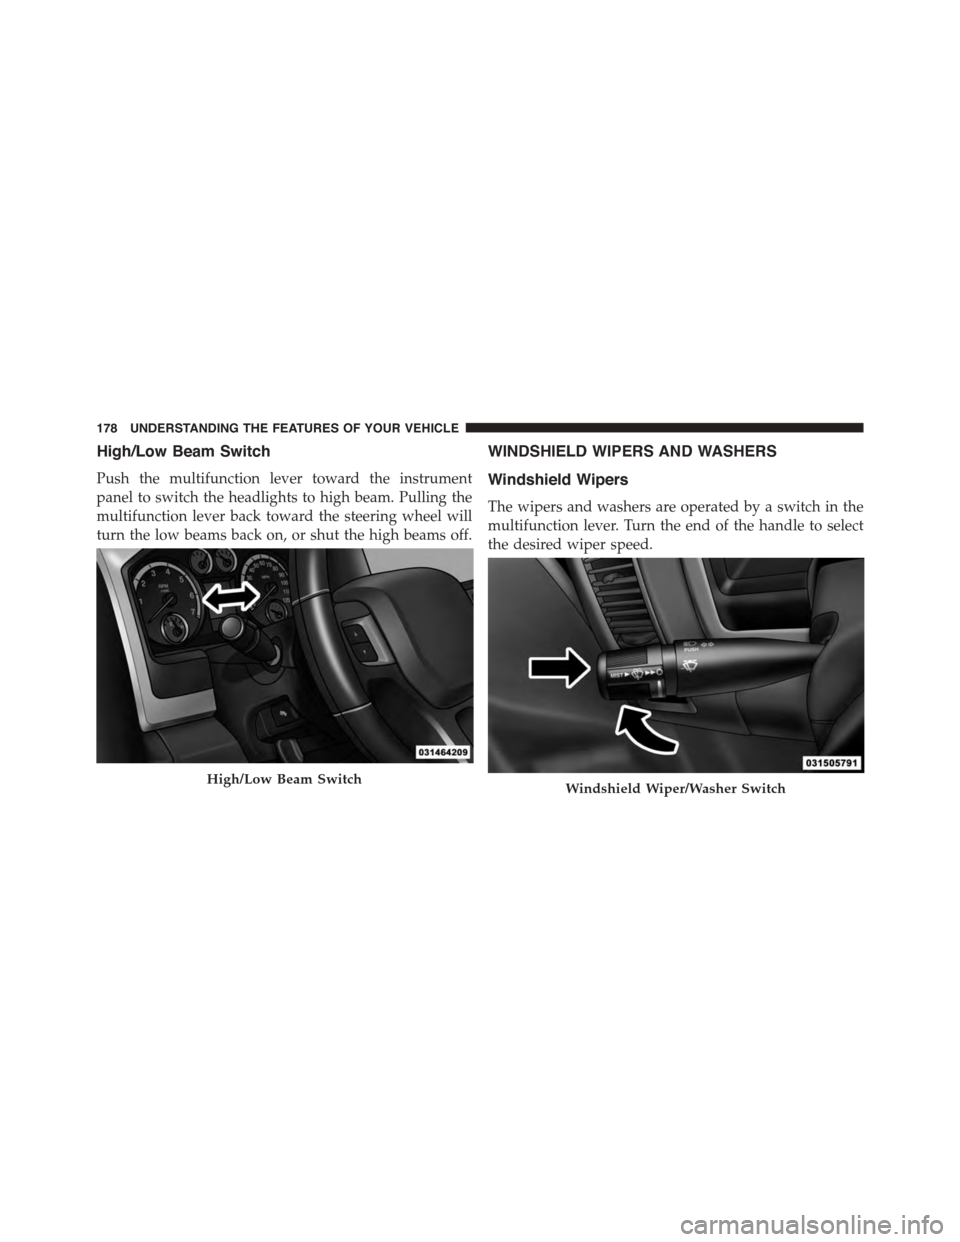 Ram 1500 2015 User Guide High/Low Beam Switch
Push the multifunction lever toward the instrument
panel to switch the headlights to high beam. Pulling the
multifunction lever back toward the steering wheel will
turn the low be